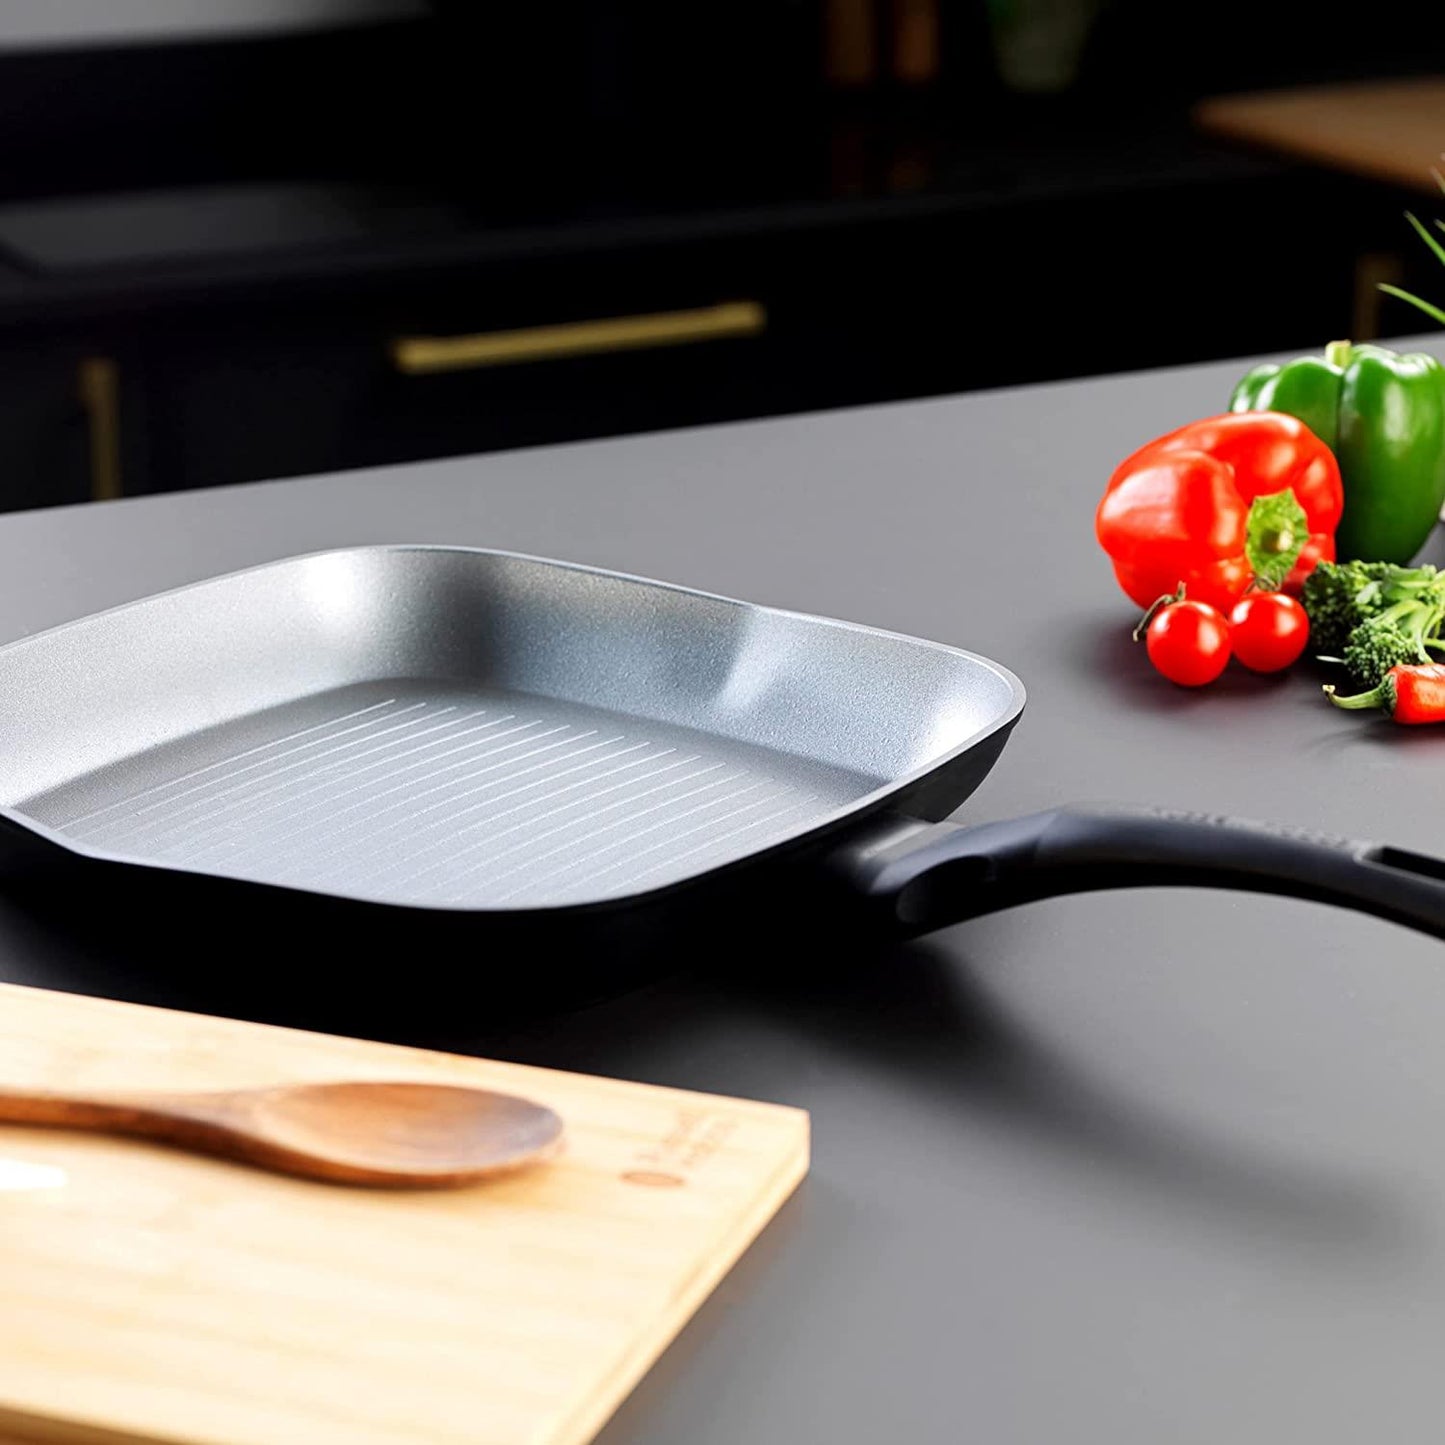 Russell Hobbs Crystaltech Graphite Non-Stick Griddle Pan- 28 cm